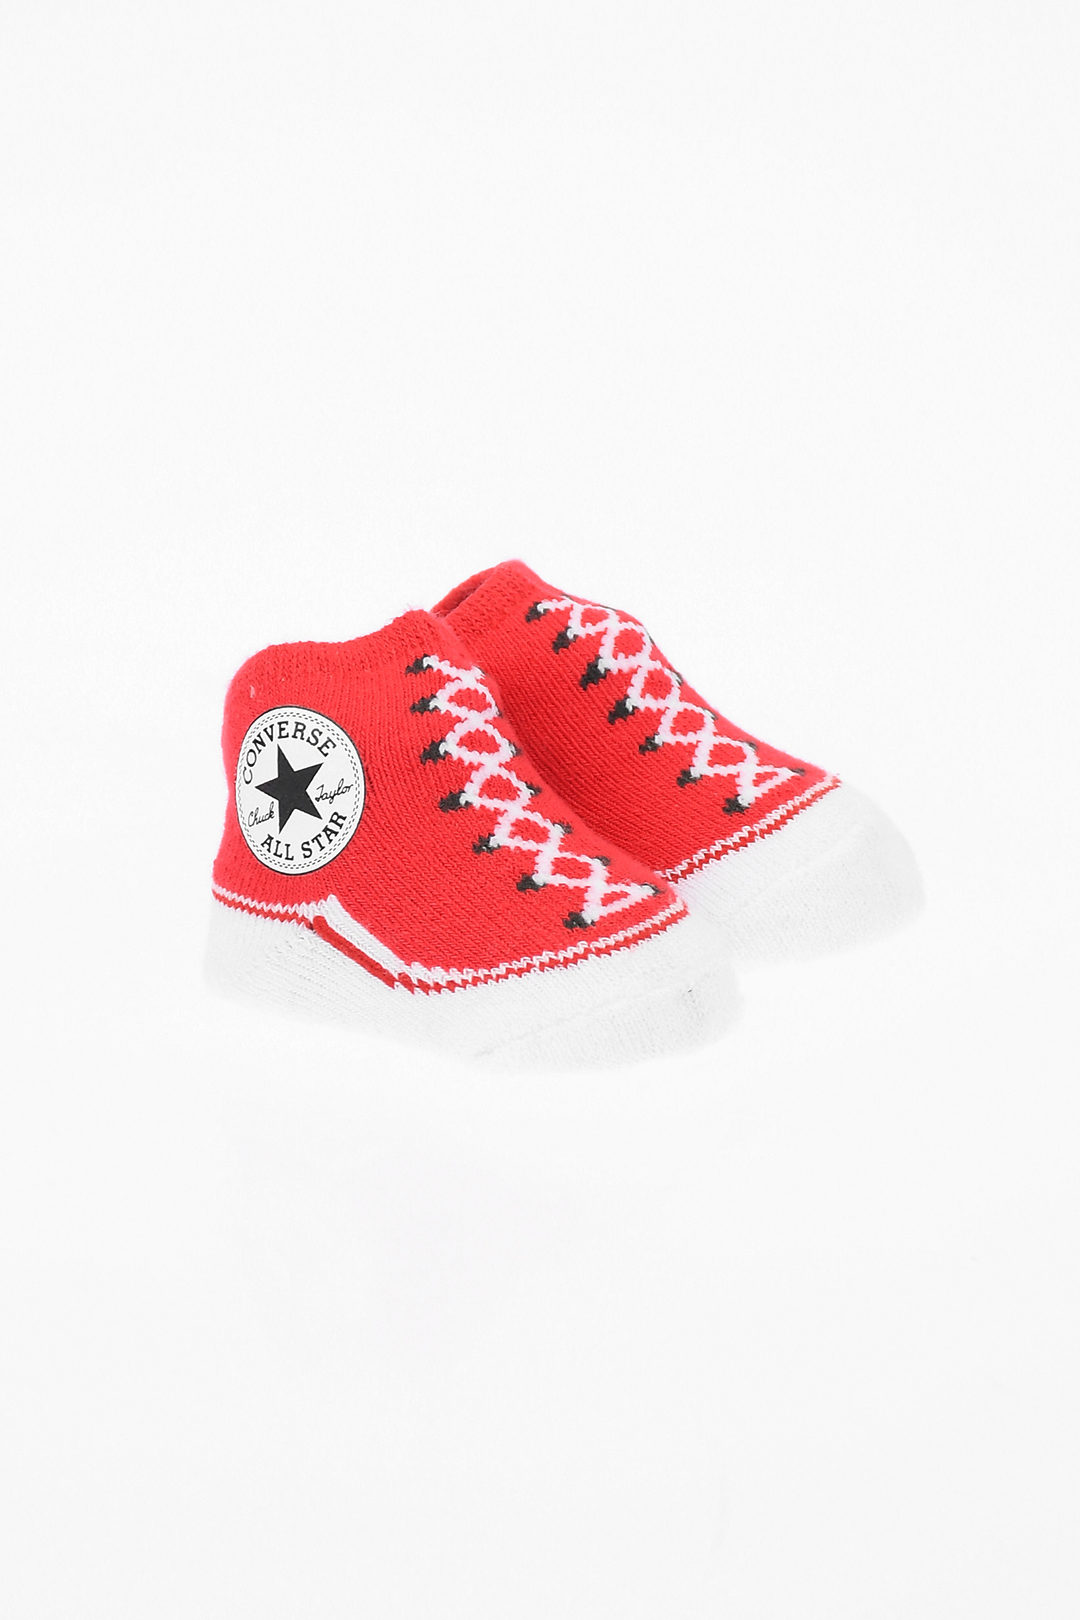 KIDS CHUCK TAYLOR ALL STAR Sock Shoes and Set boys - Glamood Outlet